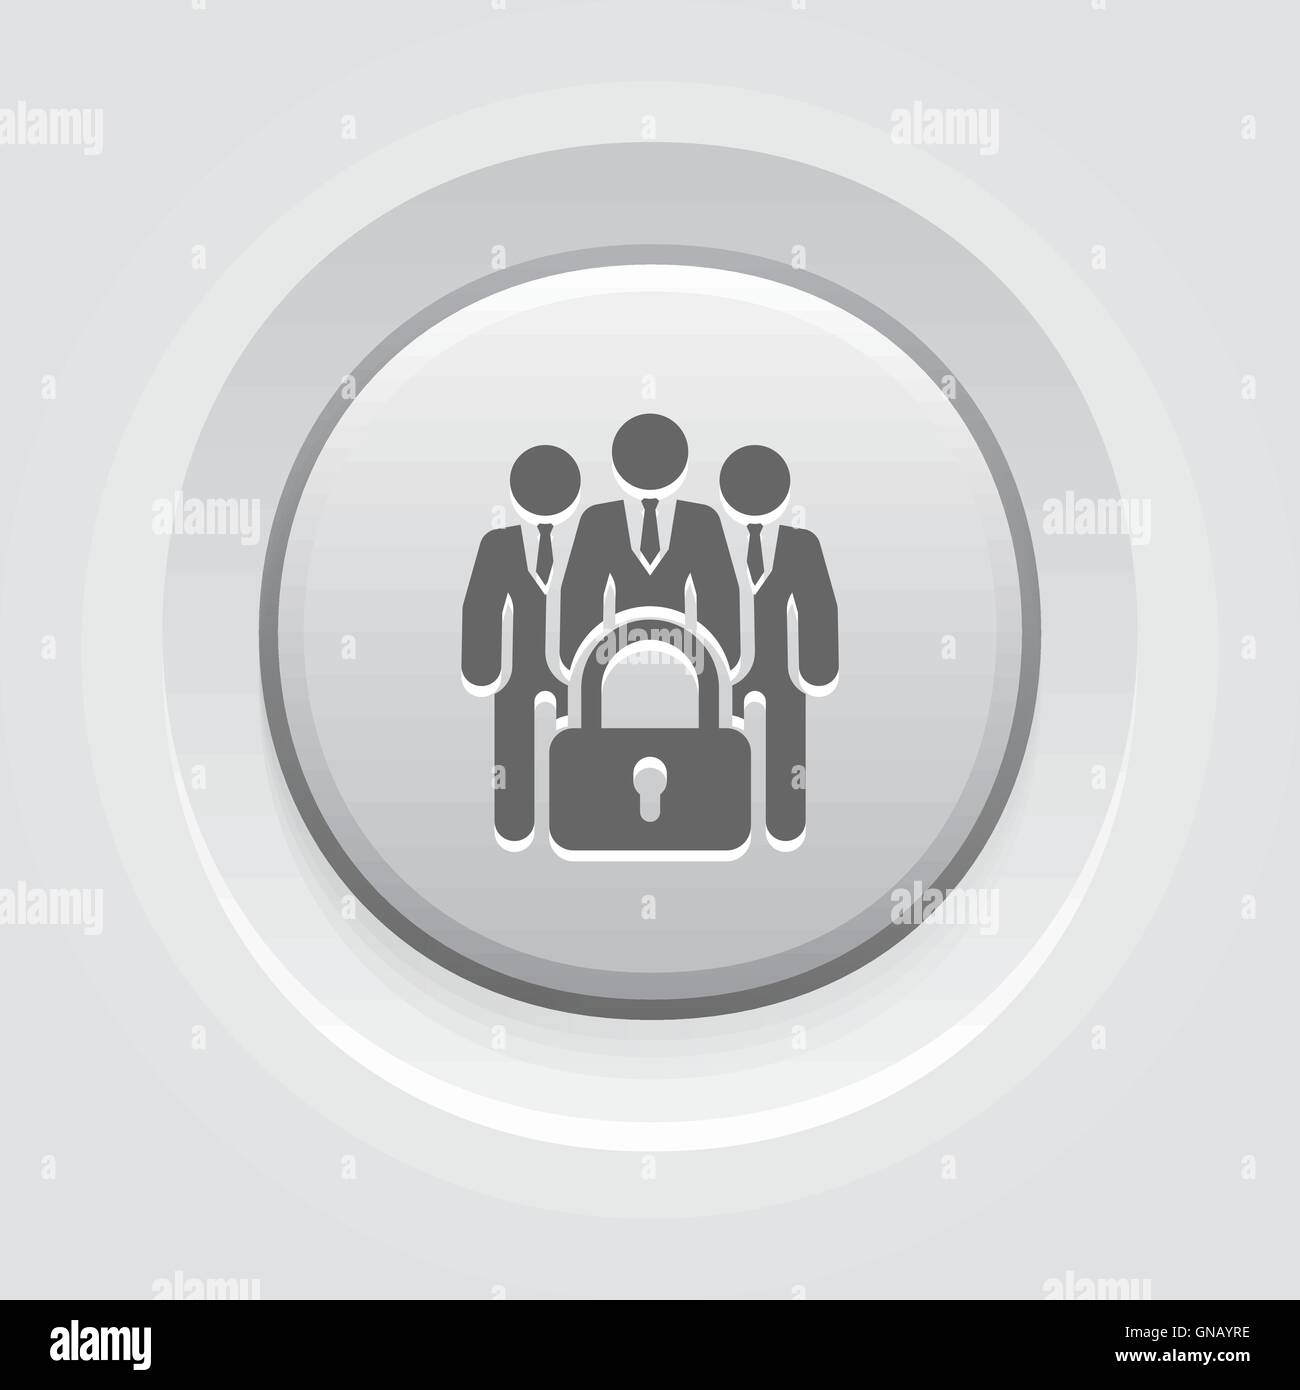 Business Security Icon Stock Vector